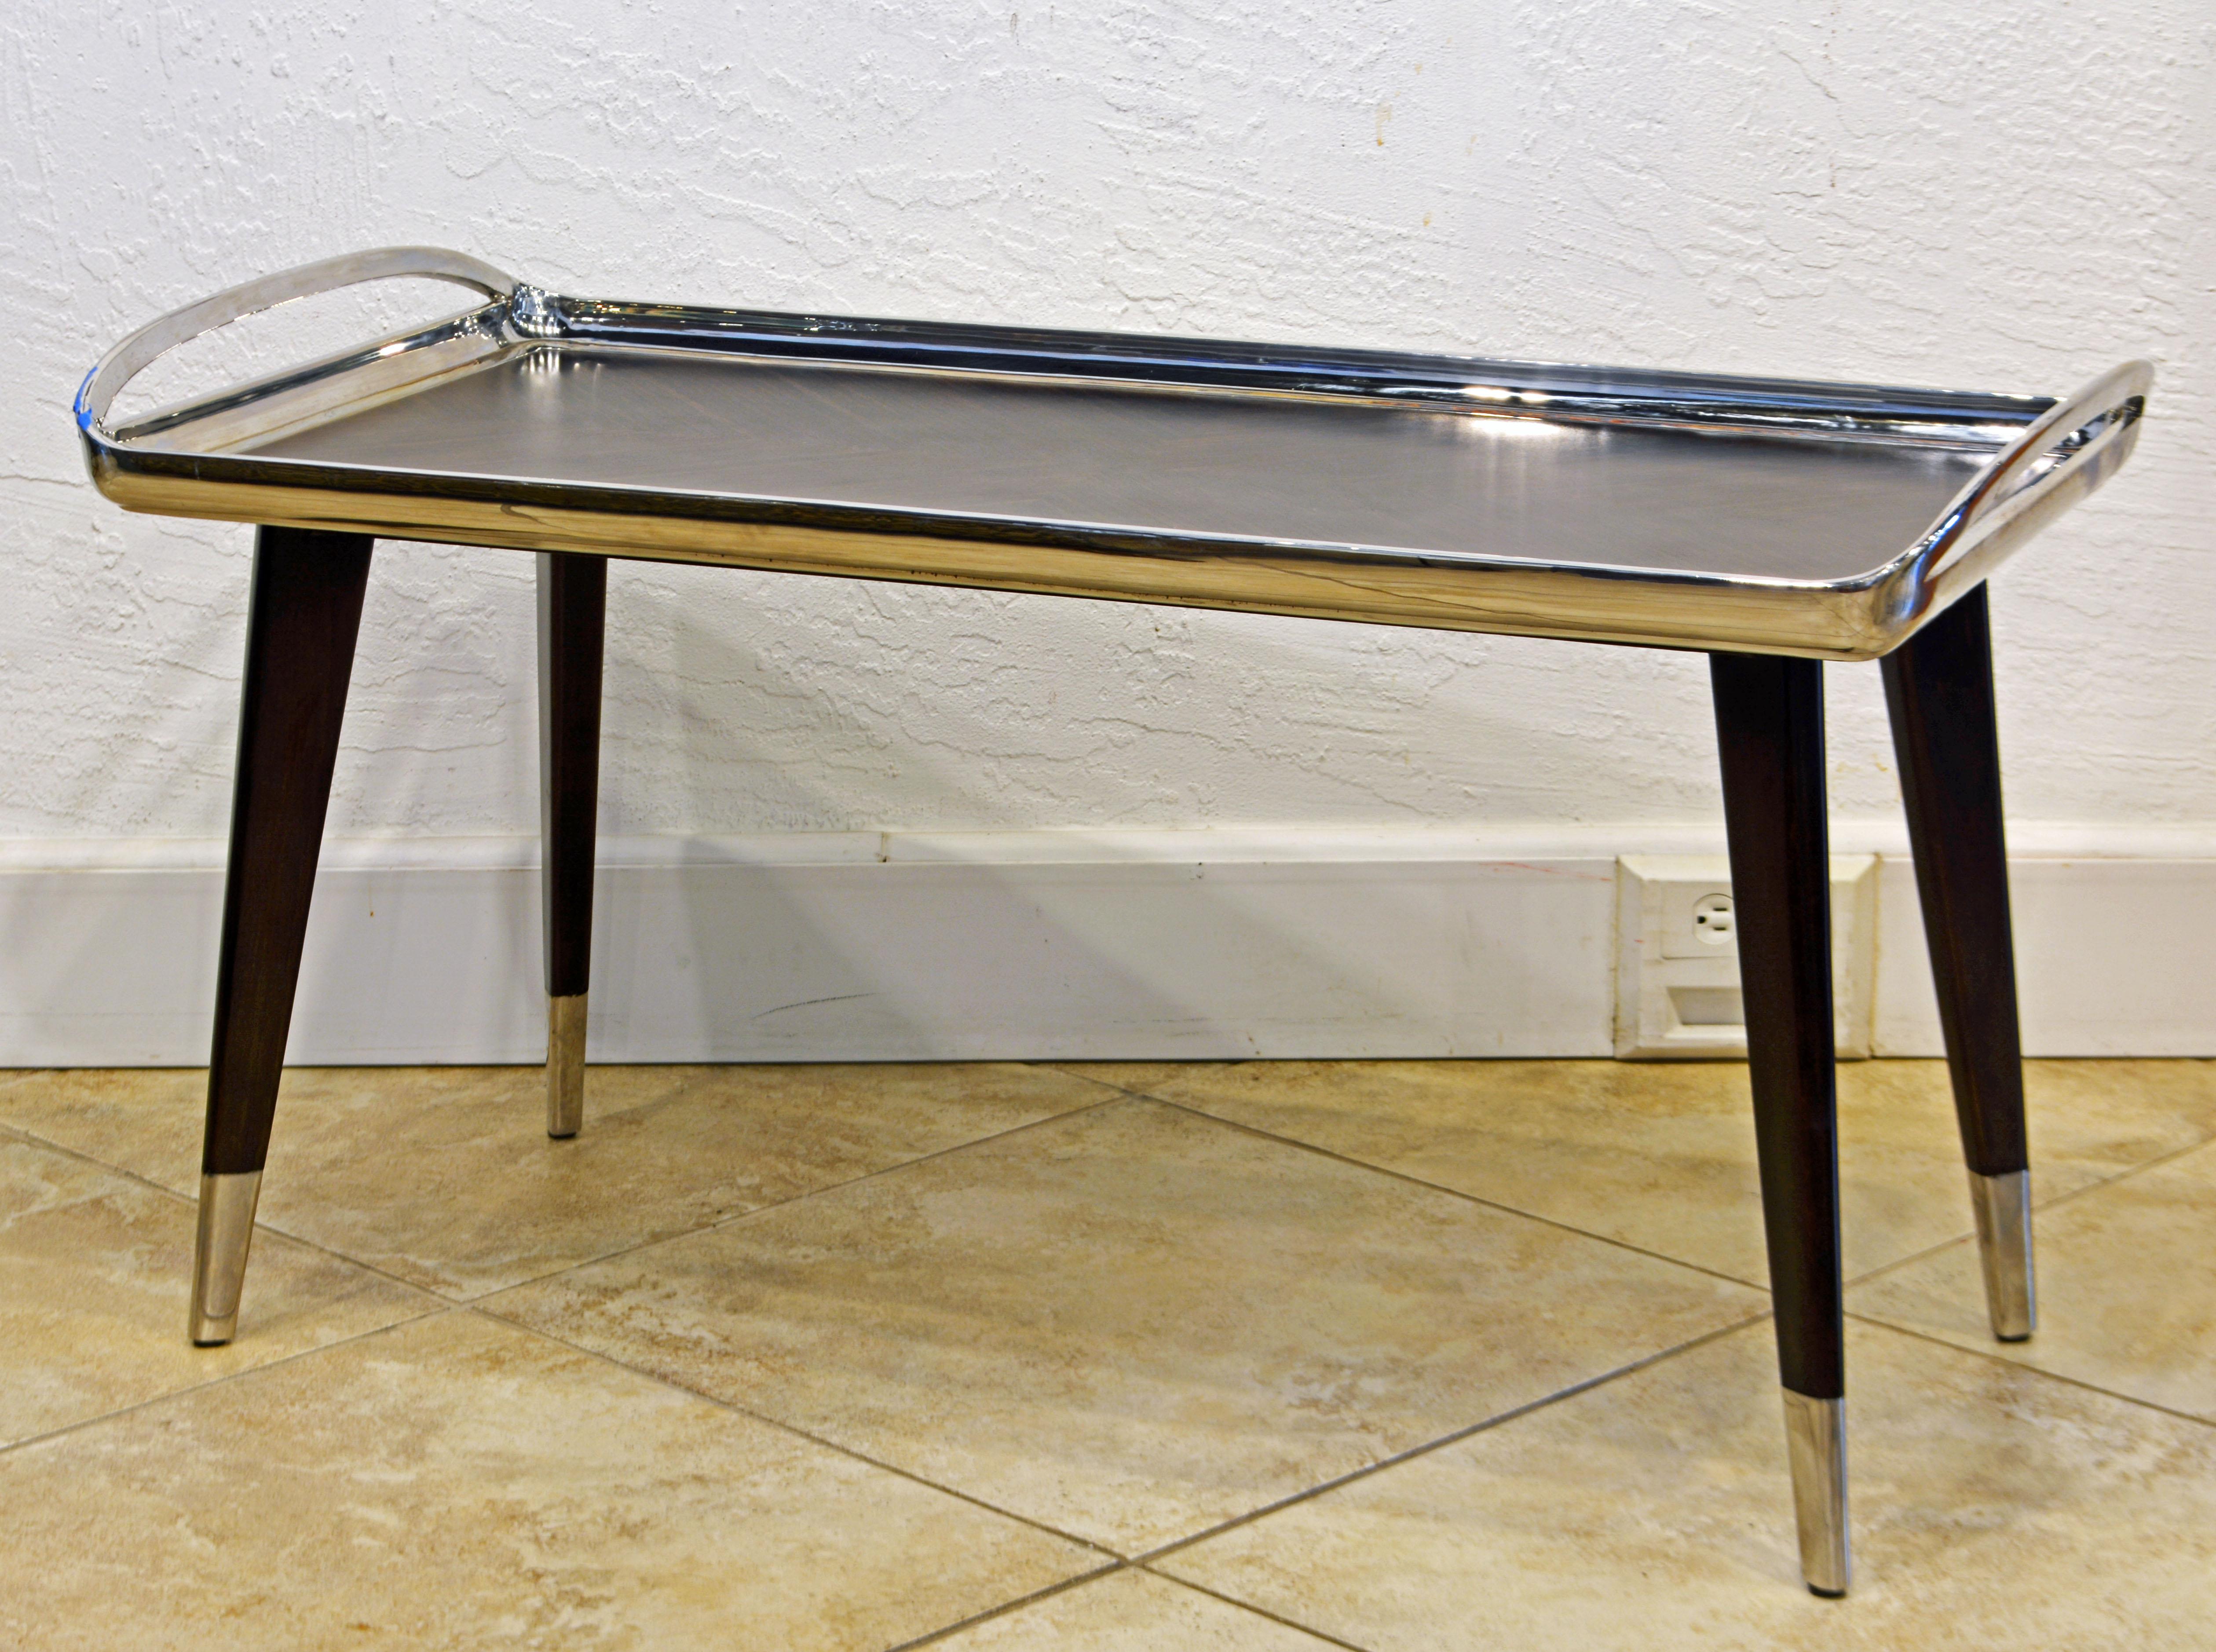 This vintage high end cocktail table by Theodore Alexander/Keno Bros. is a strikingly successful design combining a smoothly forged polished stainless frame with handles enclosing a Macassar Ebony striped parquetry table surface and creating a